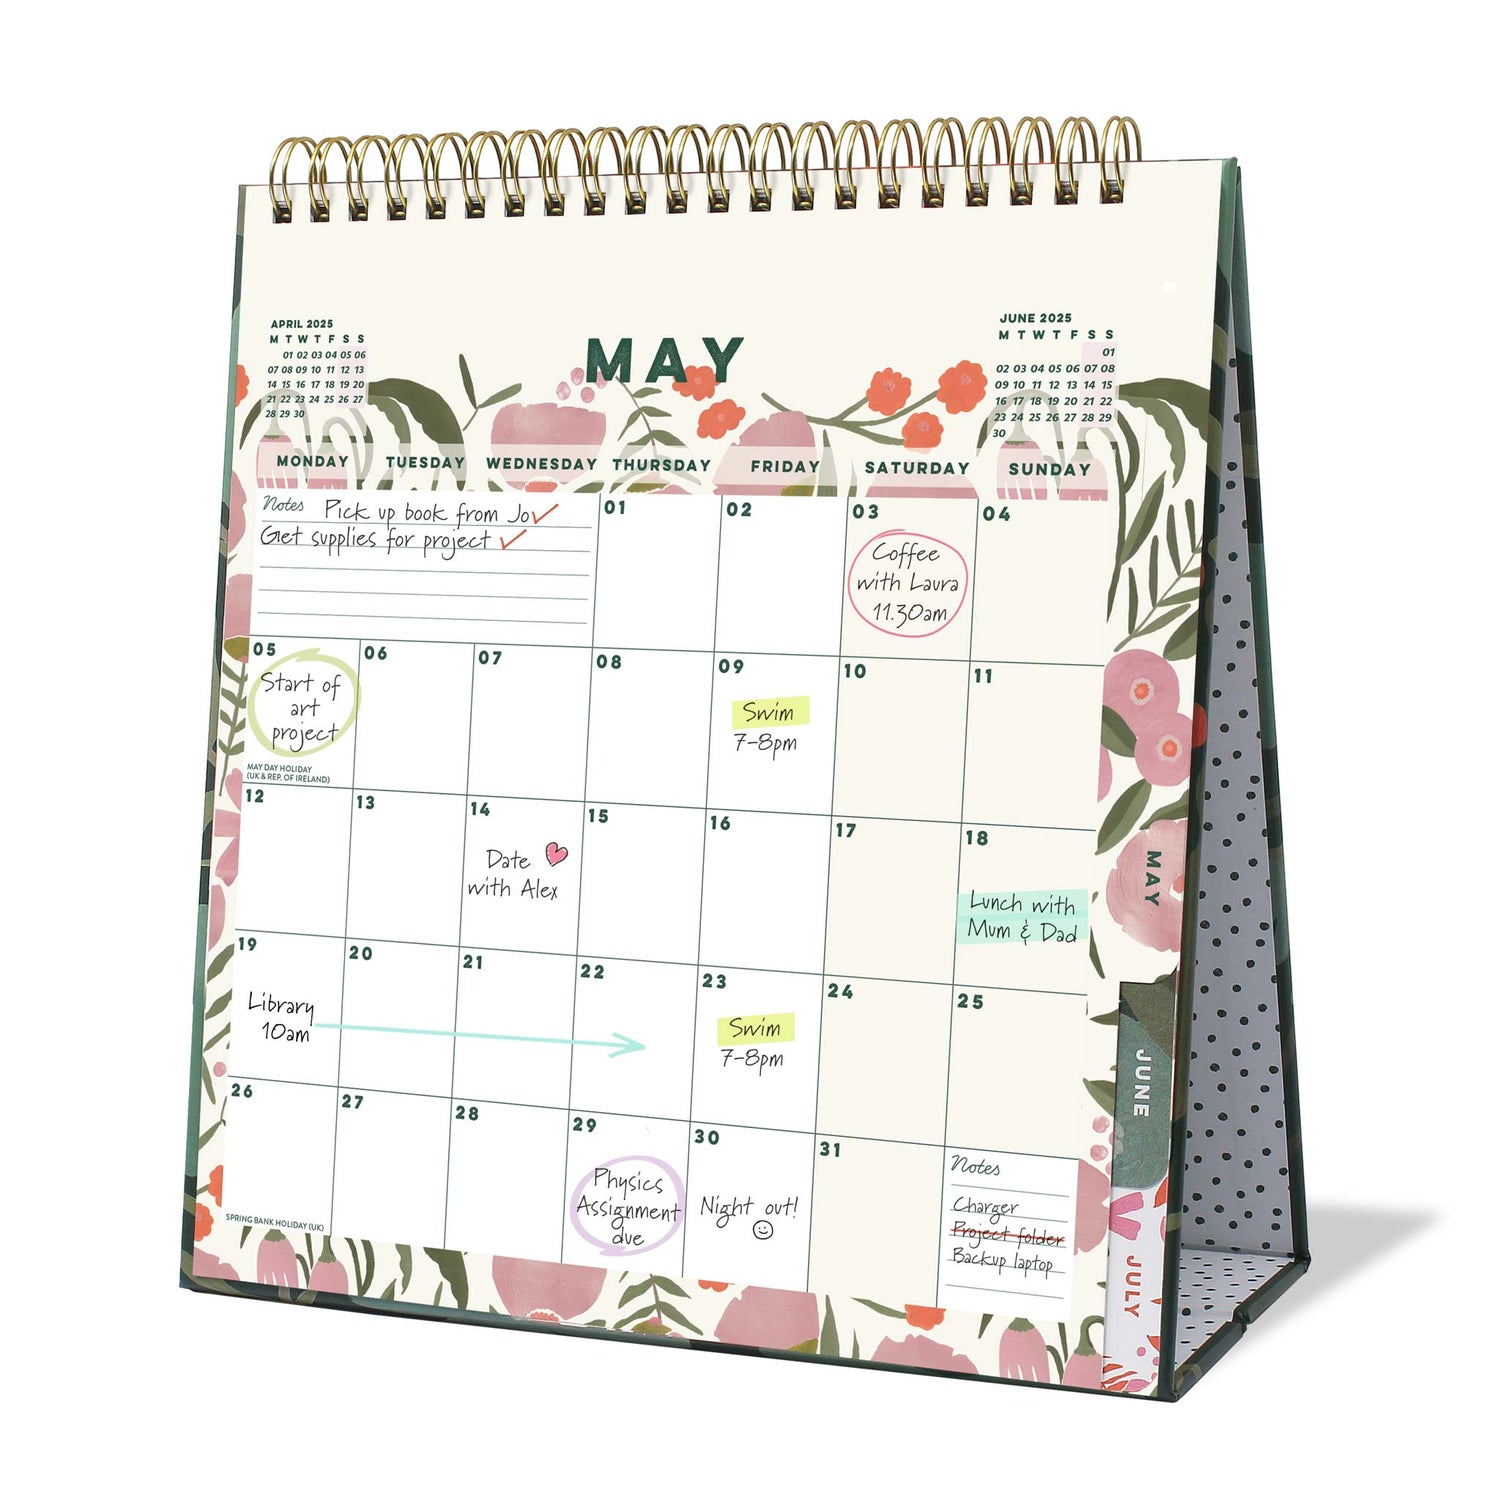 An open desk calendar page with floral pattern for May with appointments and notes